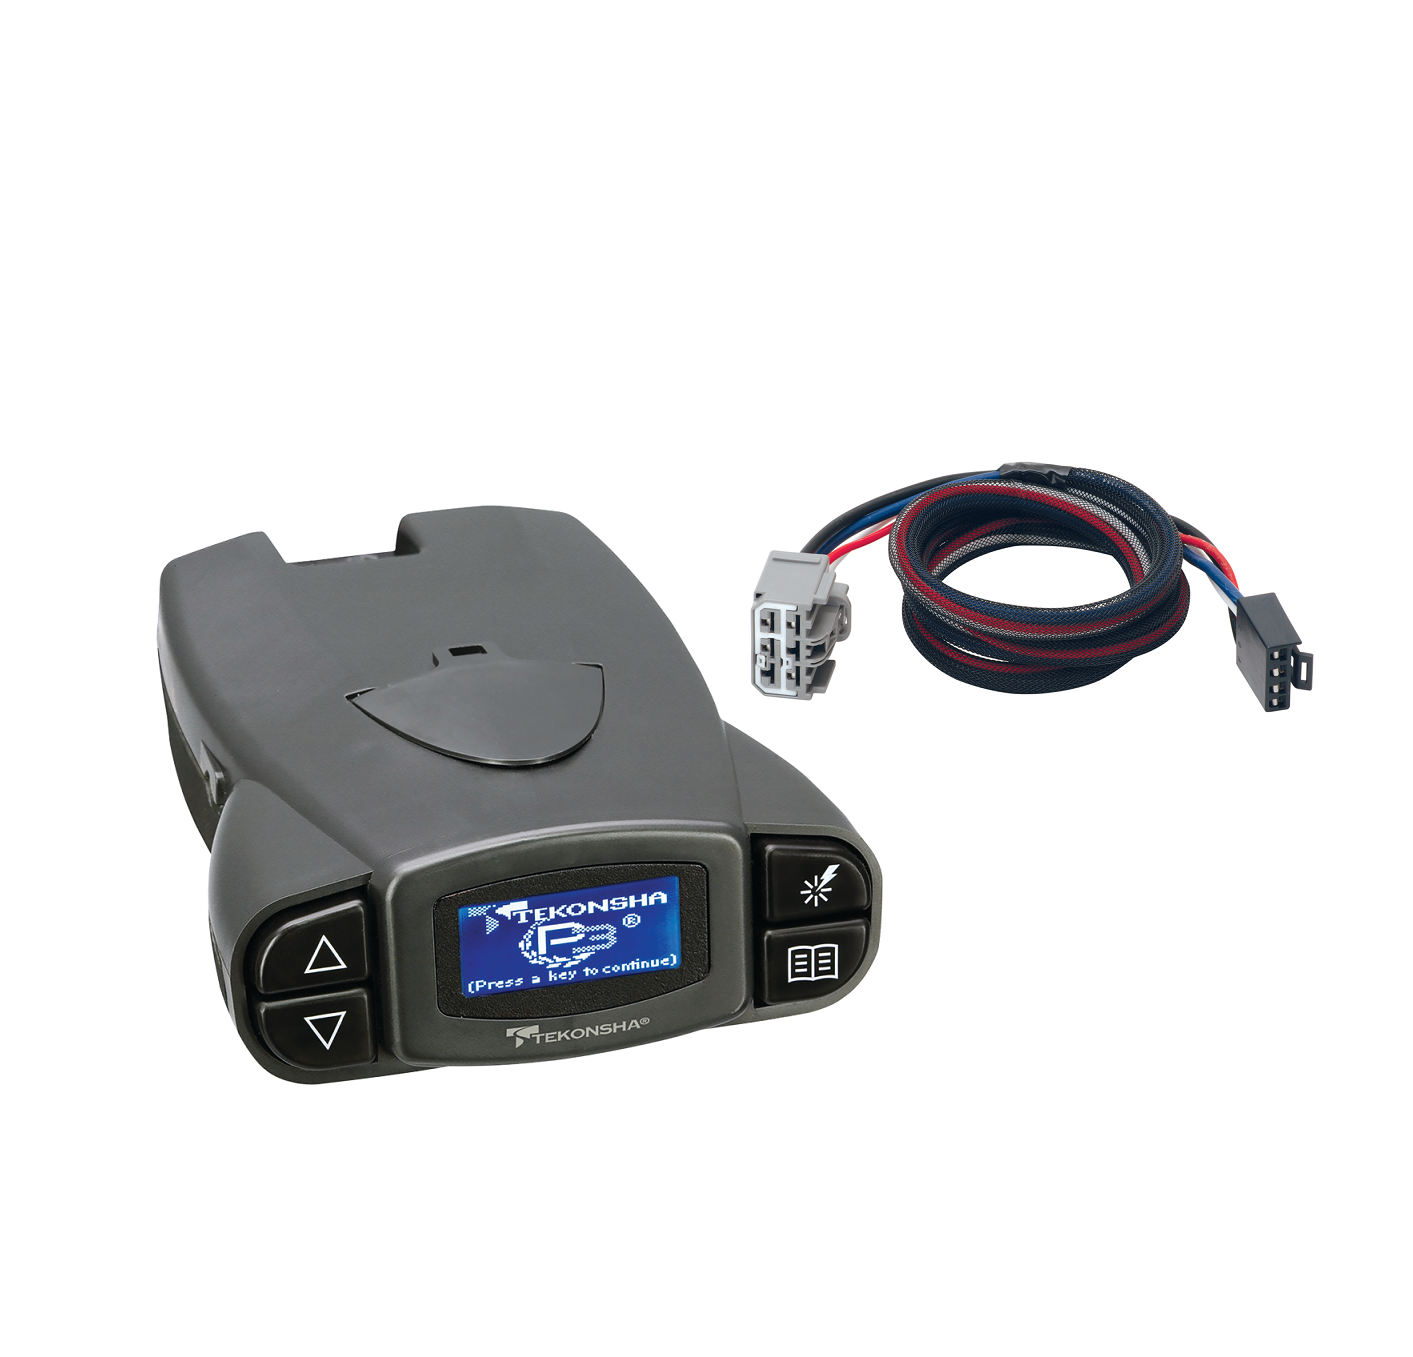 2007-2018 GMC Acadia 3026 Tekonsha Prodigy P3 Proportional Brake Controller for Trailers with 1-4 Axles 90195 w/ Plug-N-Play Wire